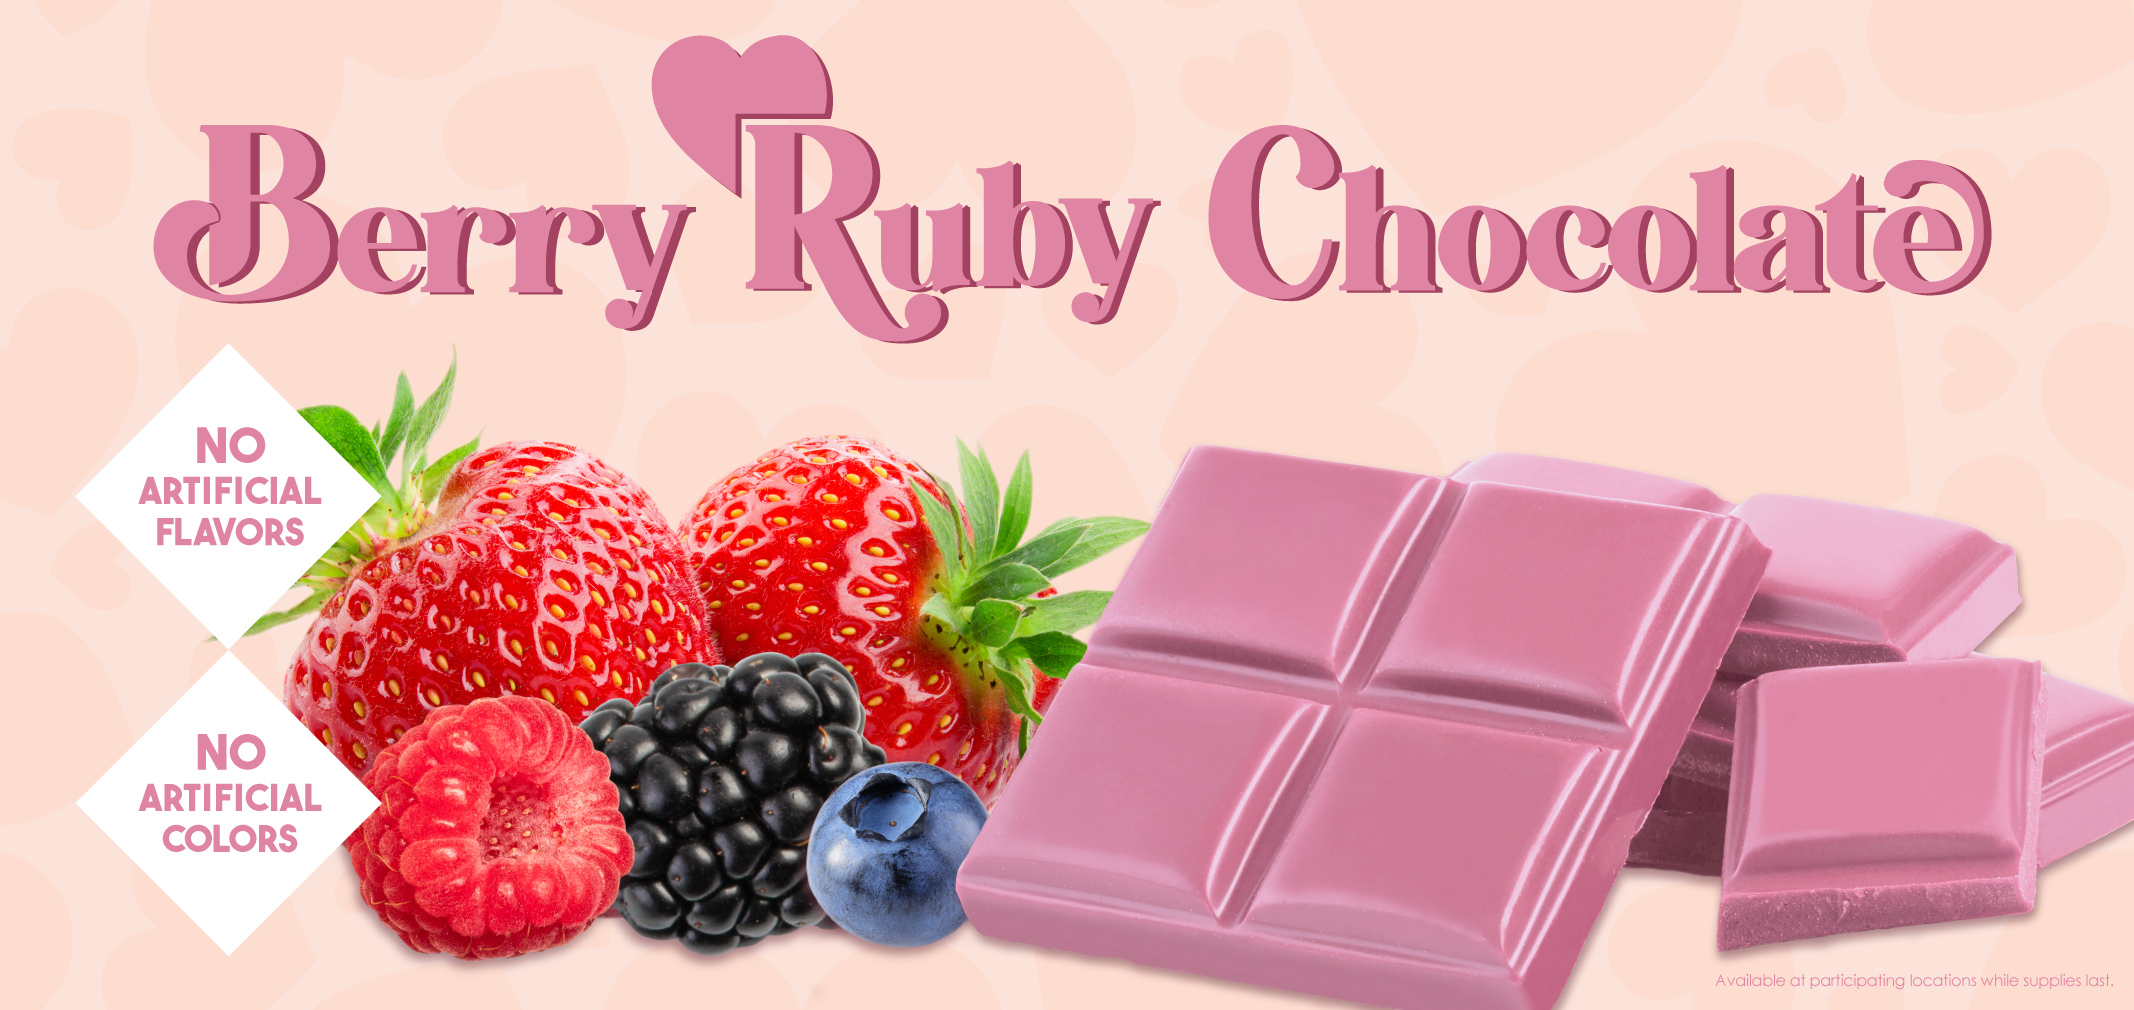 Berry Ruby Chocolate label image